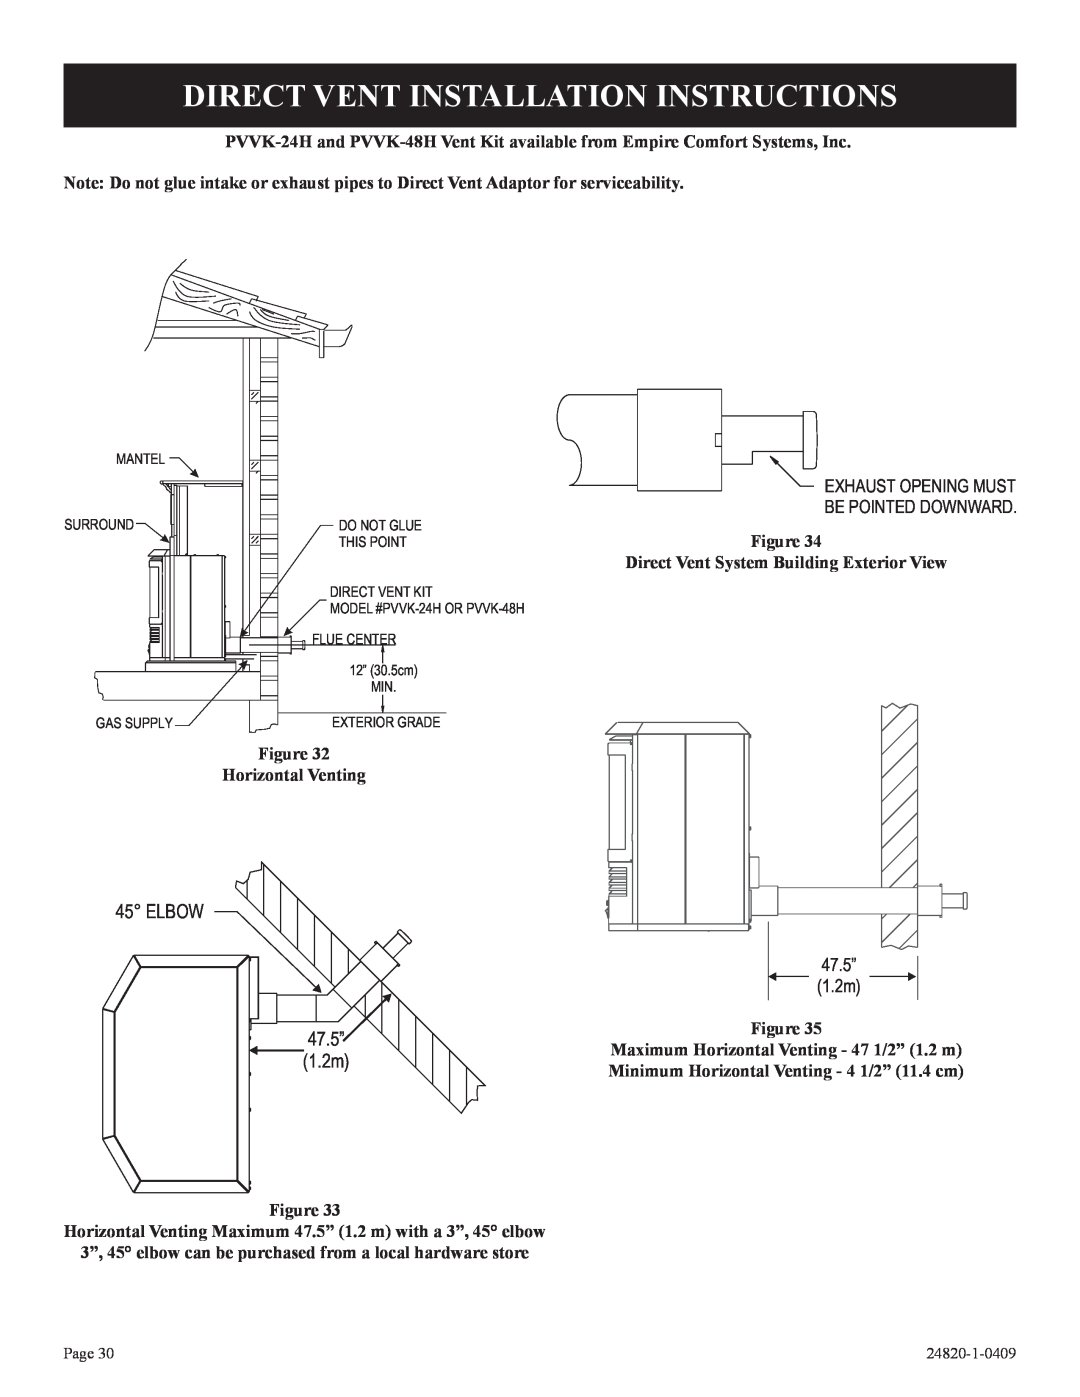 Empire Comfort Systems PV-28SV55-(C,G)2H(N,P)-1, PV-28SV50-B(N,P)-1 Direct Vent Installation Instructions, ELBOW 47.5”1.2m 